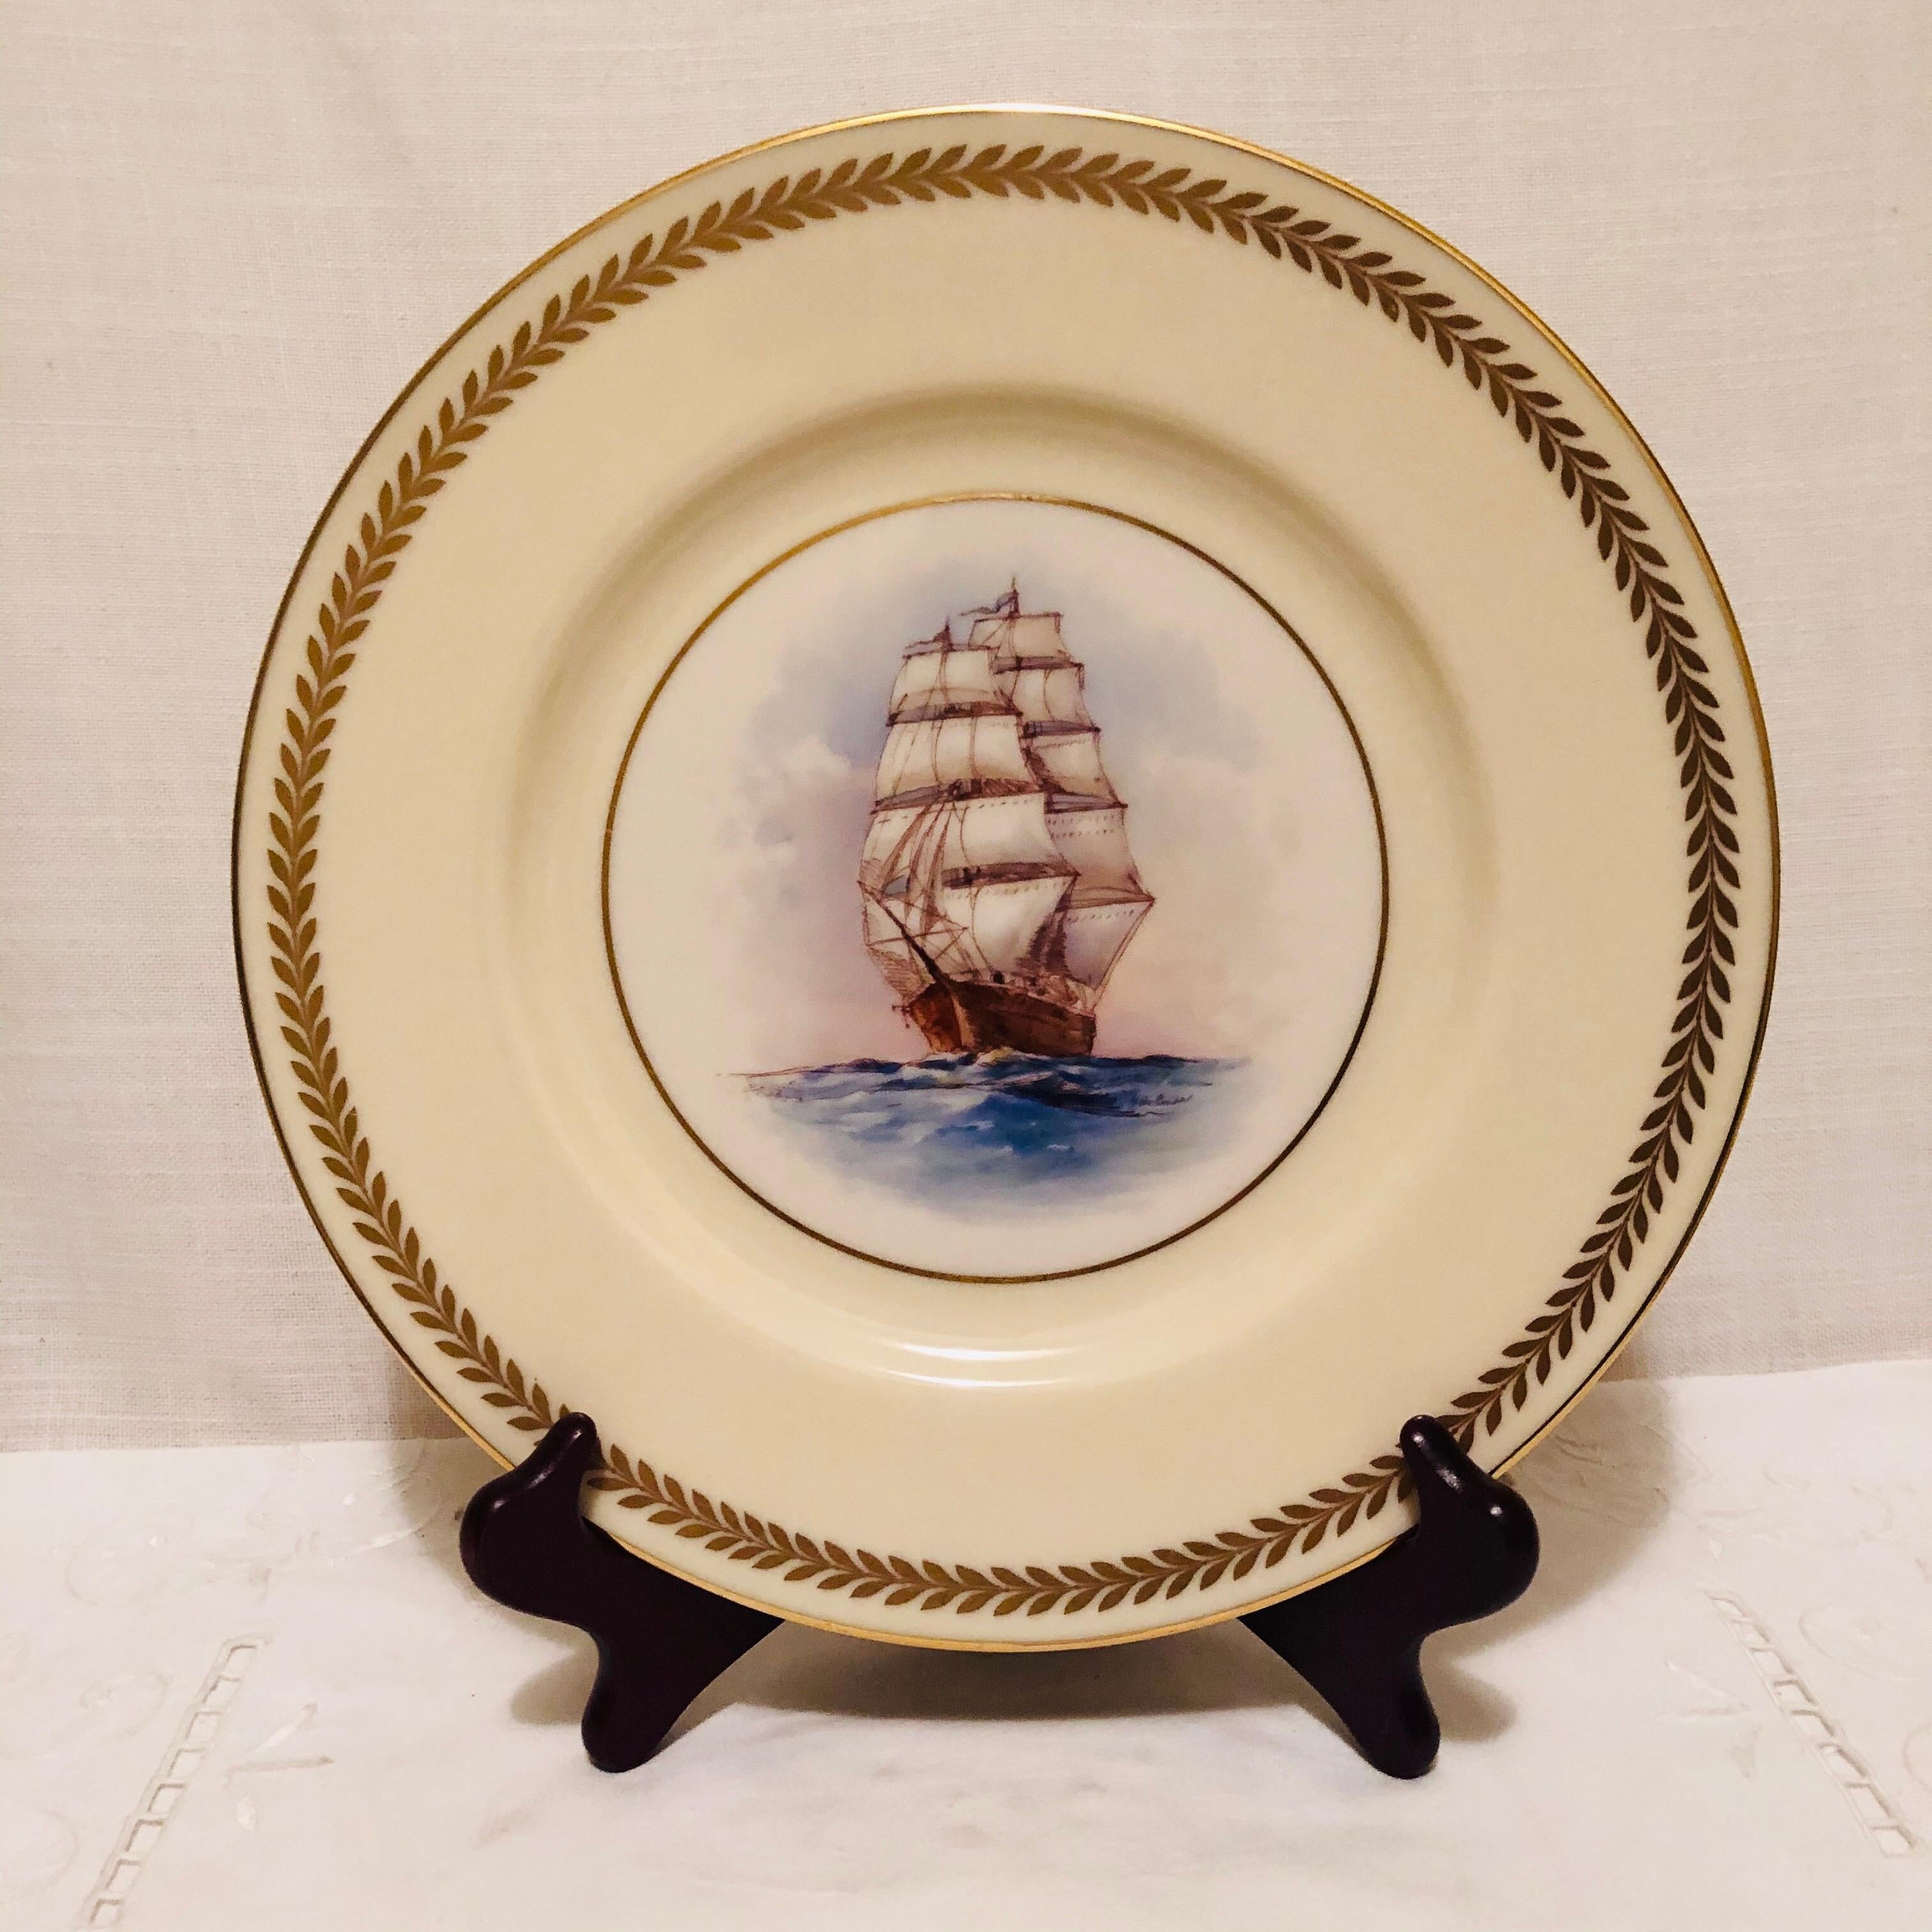 Hand-Painted Set of Twelve Lenox Plates Each Hand Painted with a Different Tall Ship